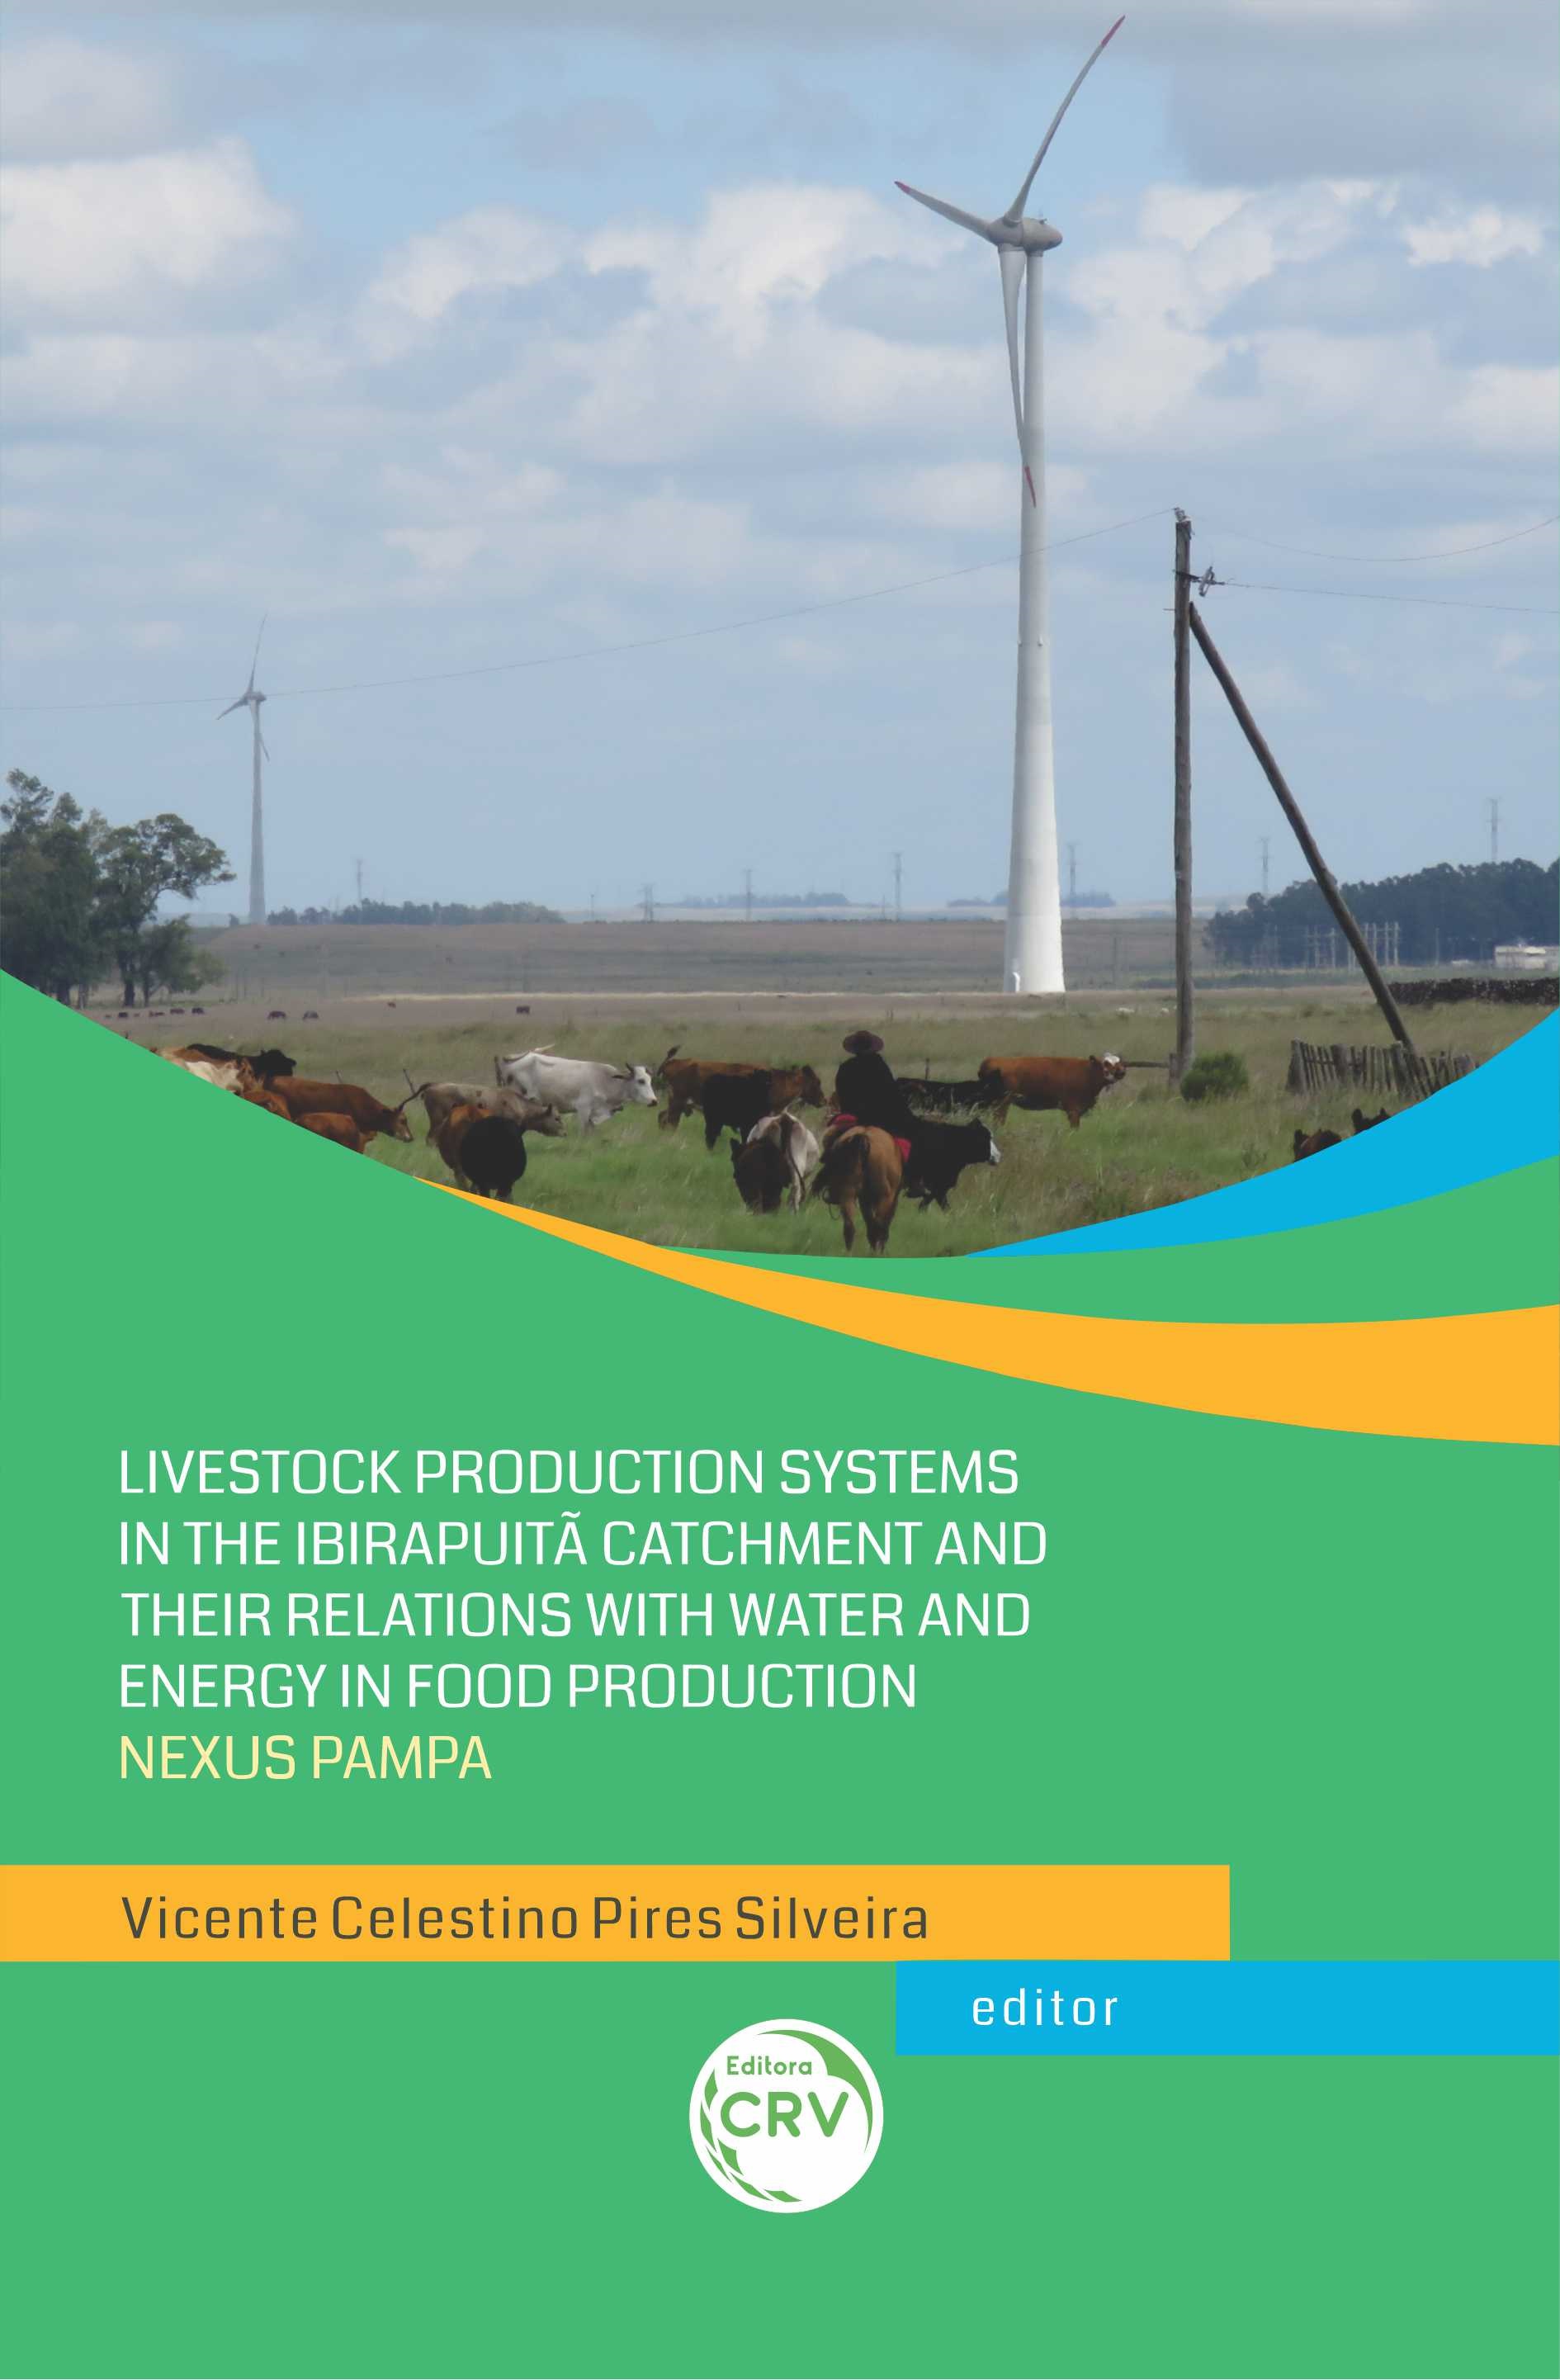 Capa do livro: LIVESTOCK PRODUCTION SYSTEMS IN THE IBIRAPUITÃ CATCHMENT AND THEIR RELATIONS WITH WATER AND ENERGY IN FOOD PRODUCTION – NEXUS PAMPA